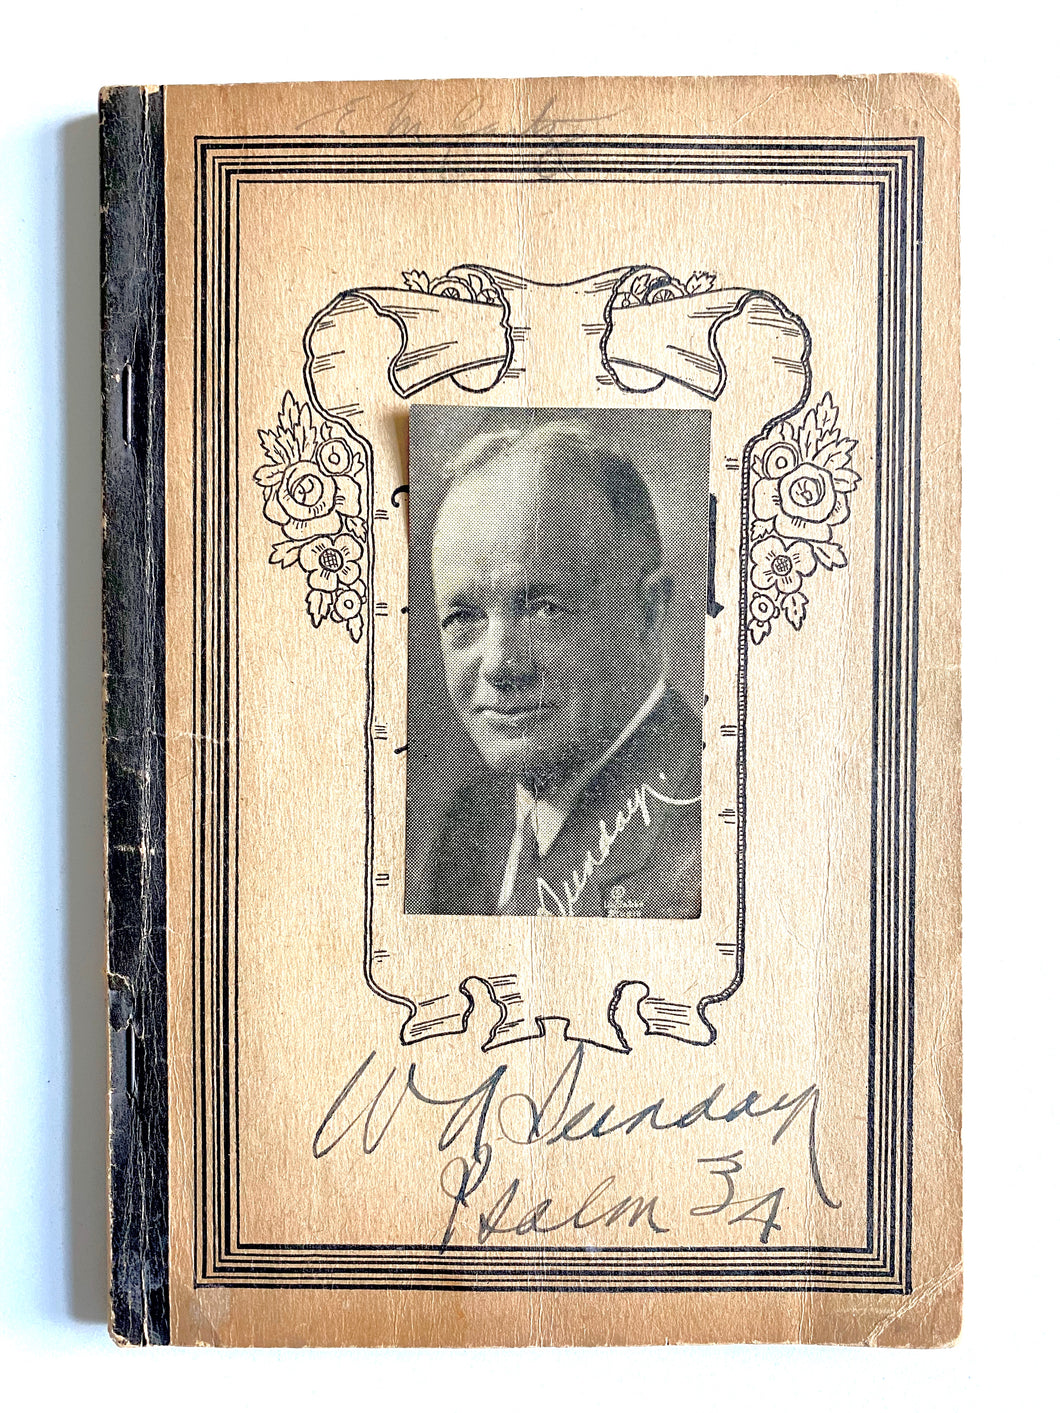 1929 BILLY SUNDAY. Wonderful Autographed Billy Sunday Revival Meeting Hymnal!